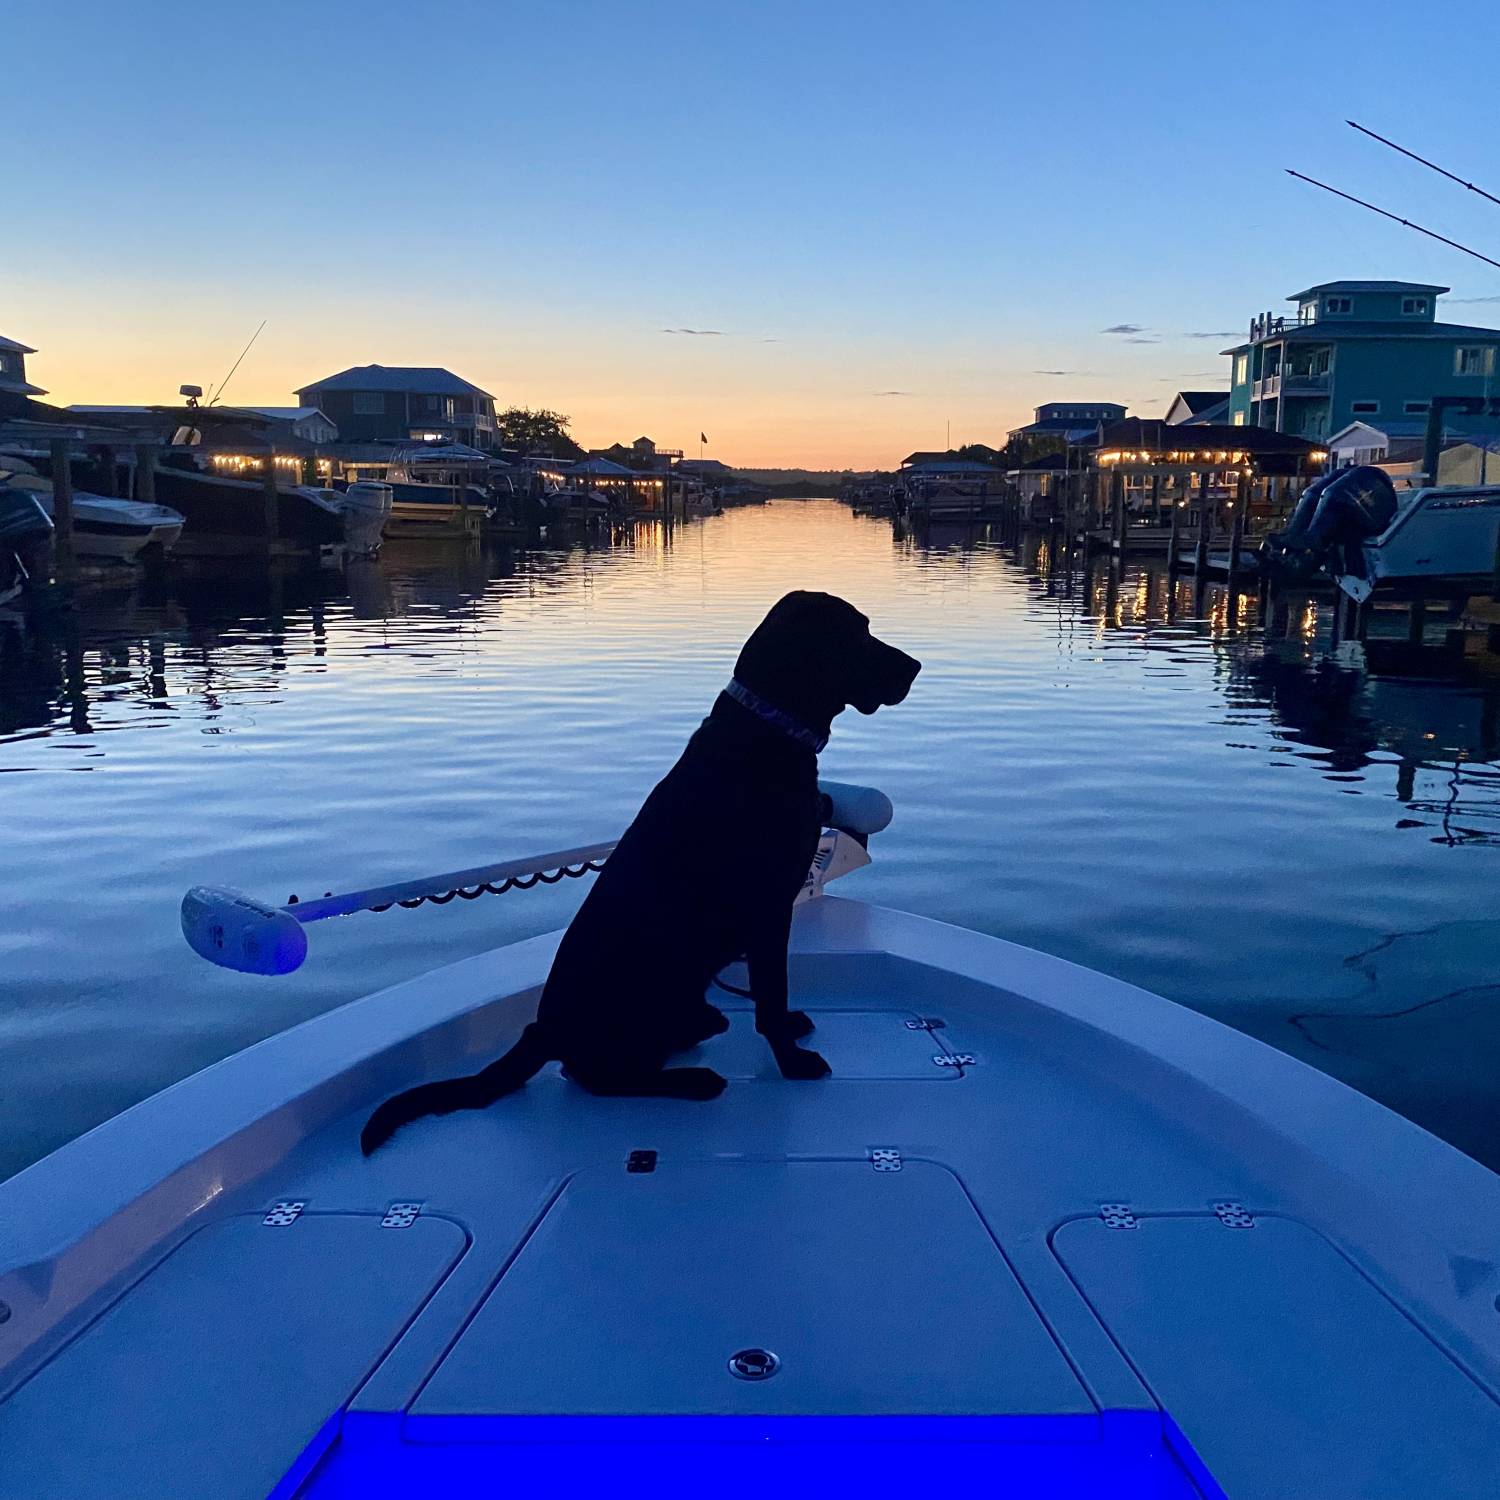 Our black lab, Beau, enjoying a night ride on the canals of Surf City.